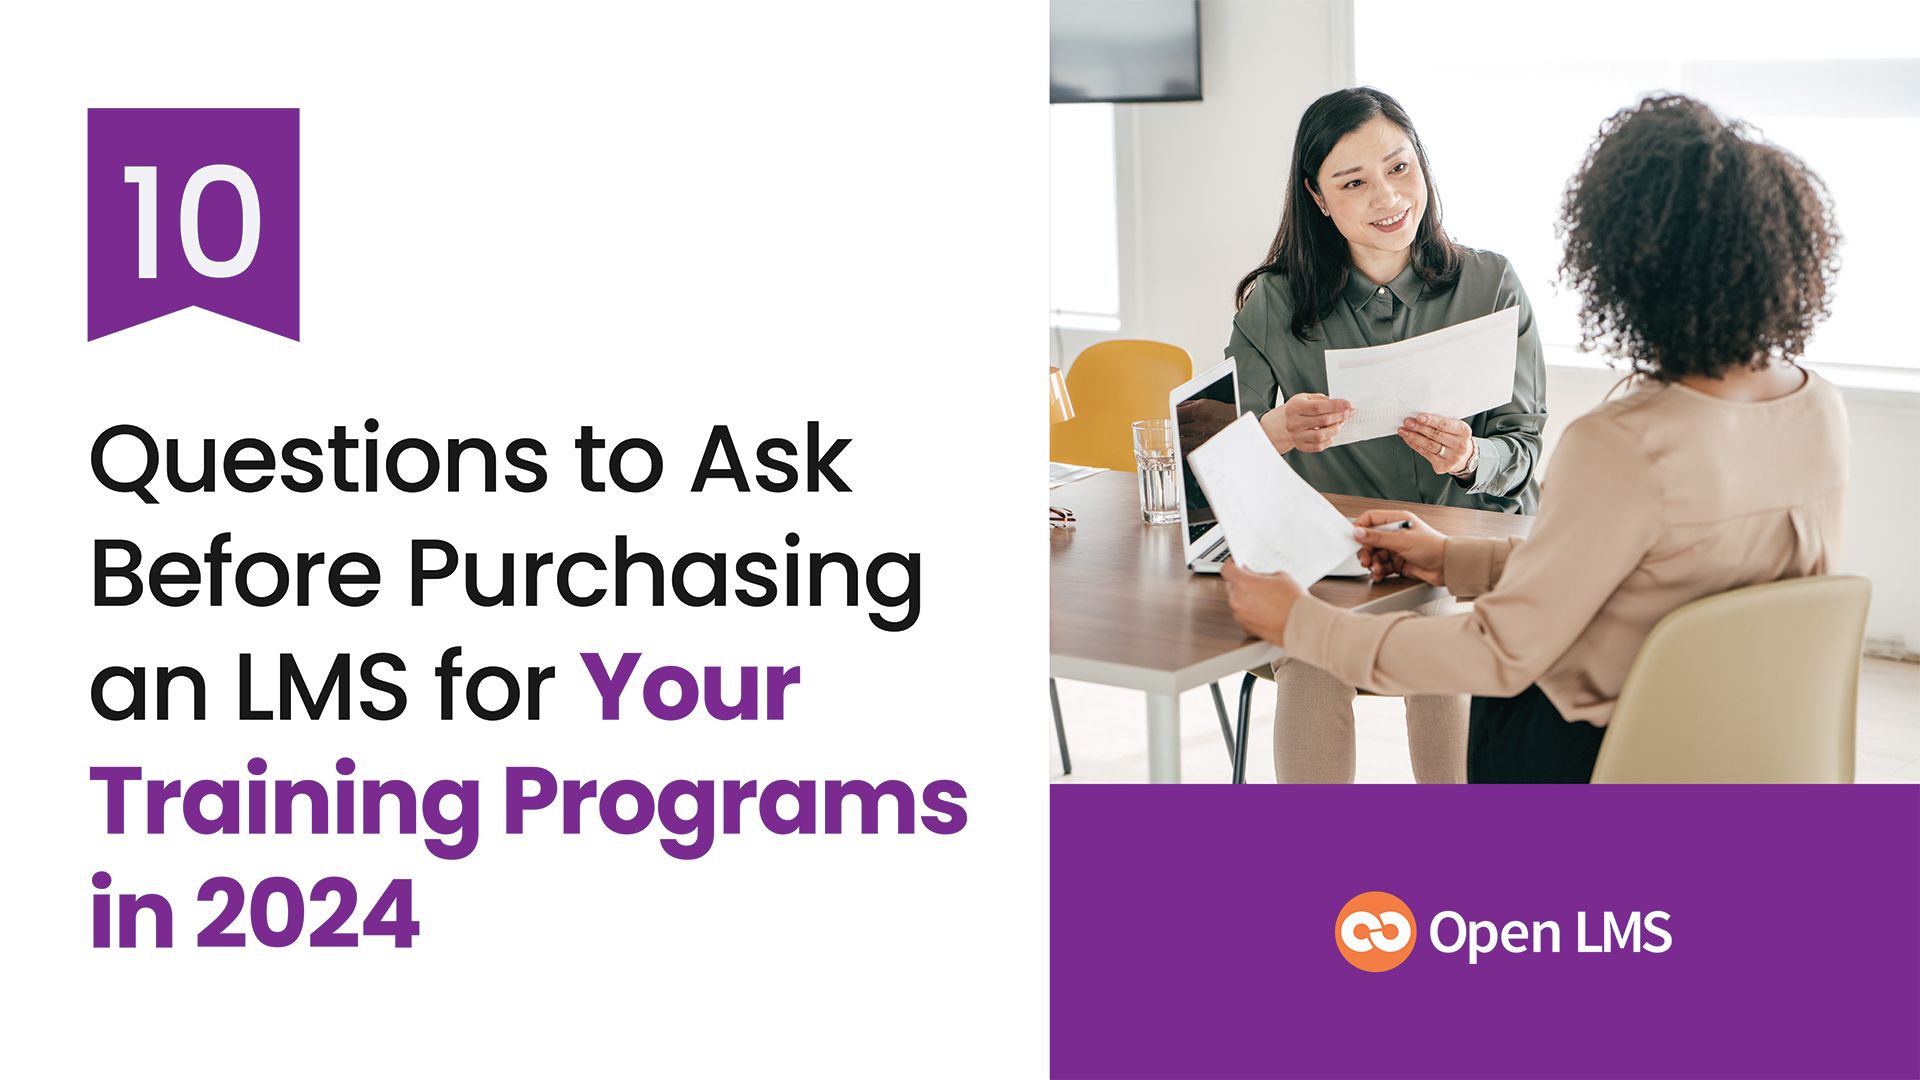 10 Questions to Ask Before Purchasing an LMS for Your Training Programs in 2024